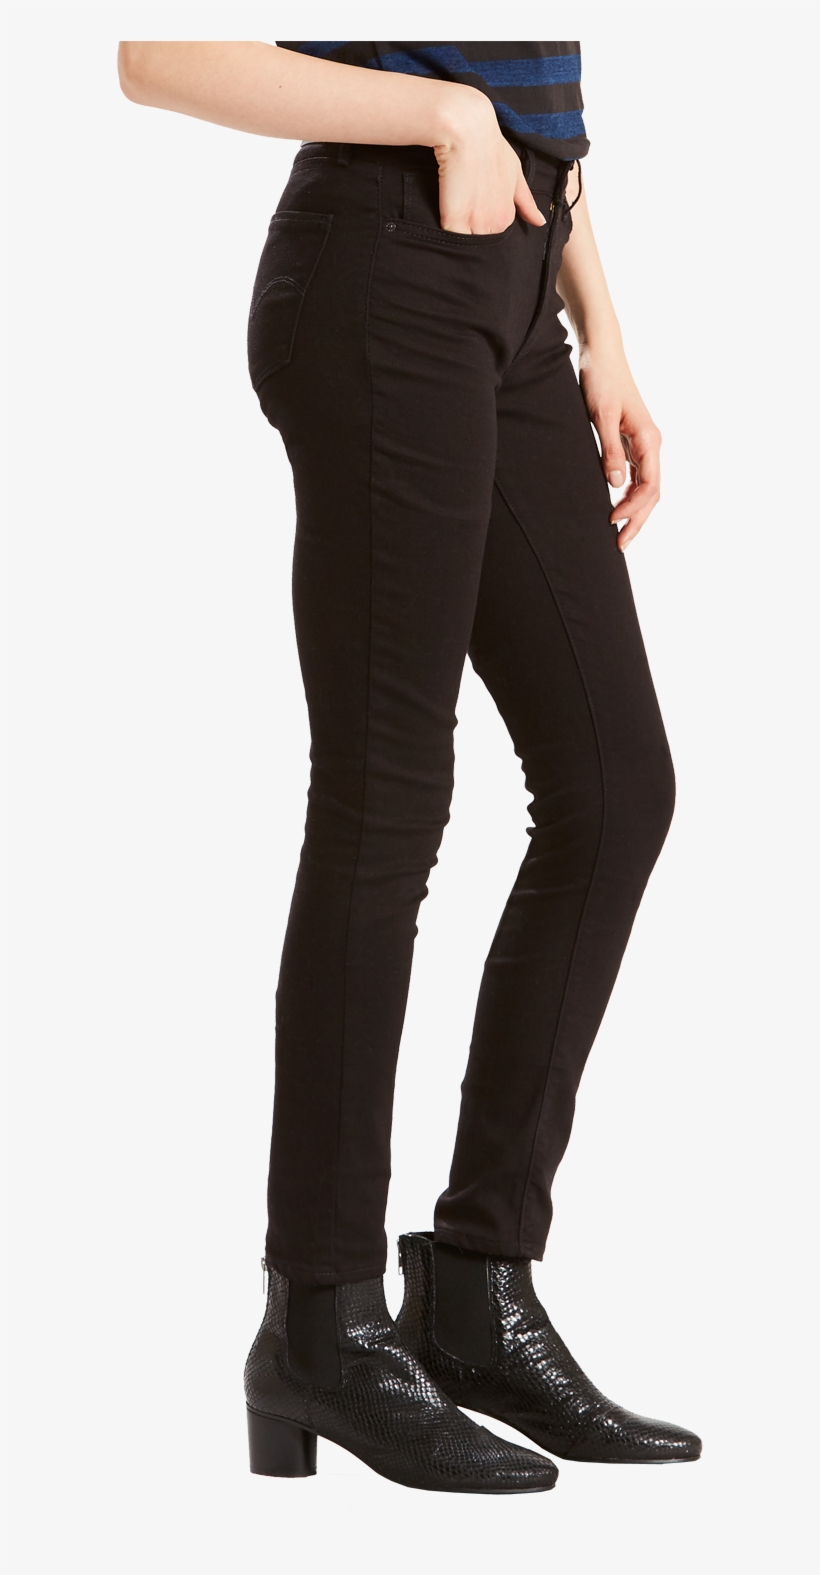 Levis Jeans High Rise Skinny Black Sheep Seitenansicht - Levi Strauss & Co., transparent png #4676629